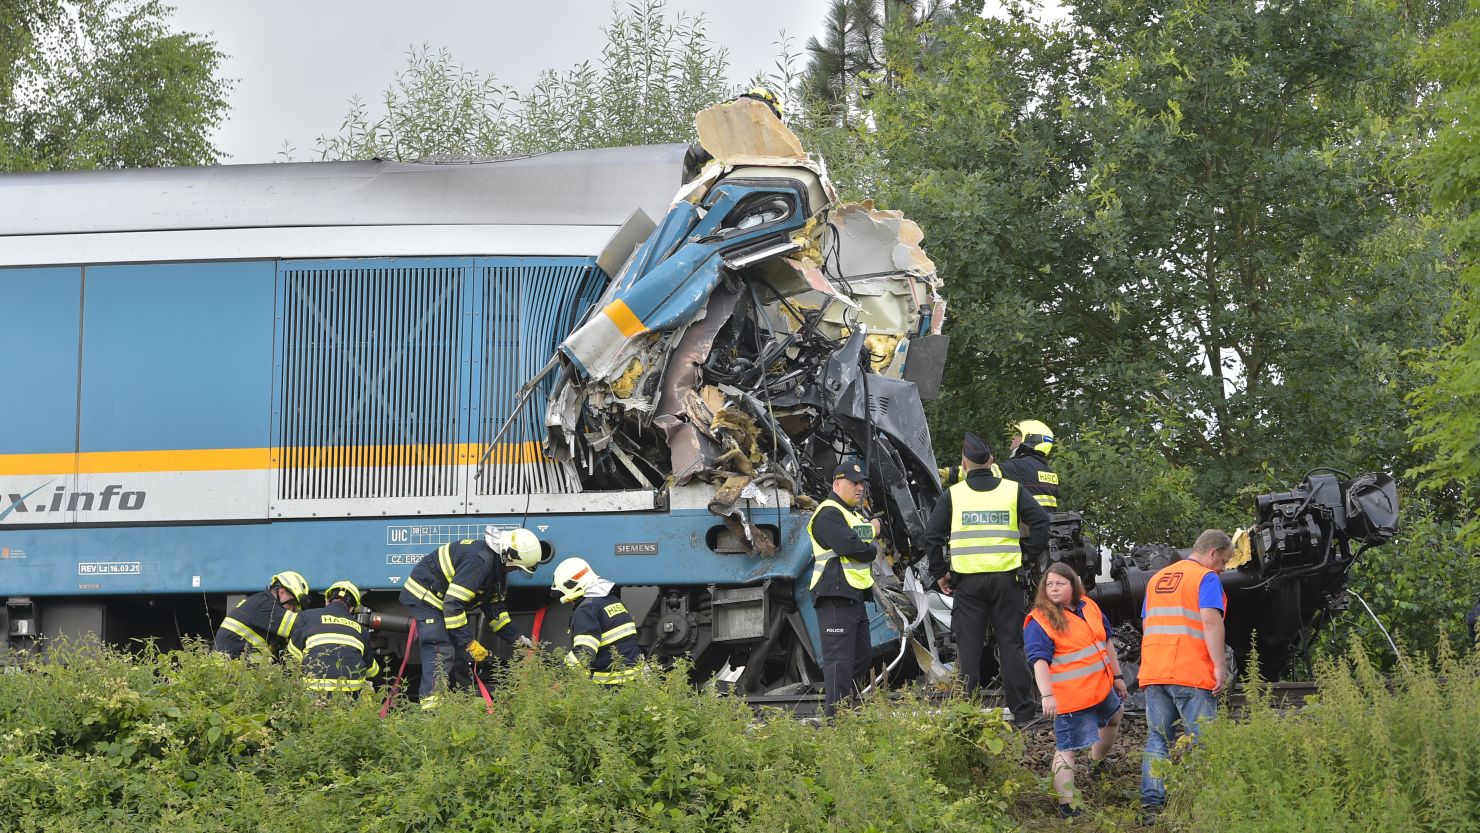 The trains collided near the village of Milavce, around 85 miles southwest of the Czech capital Prague.